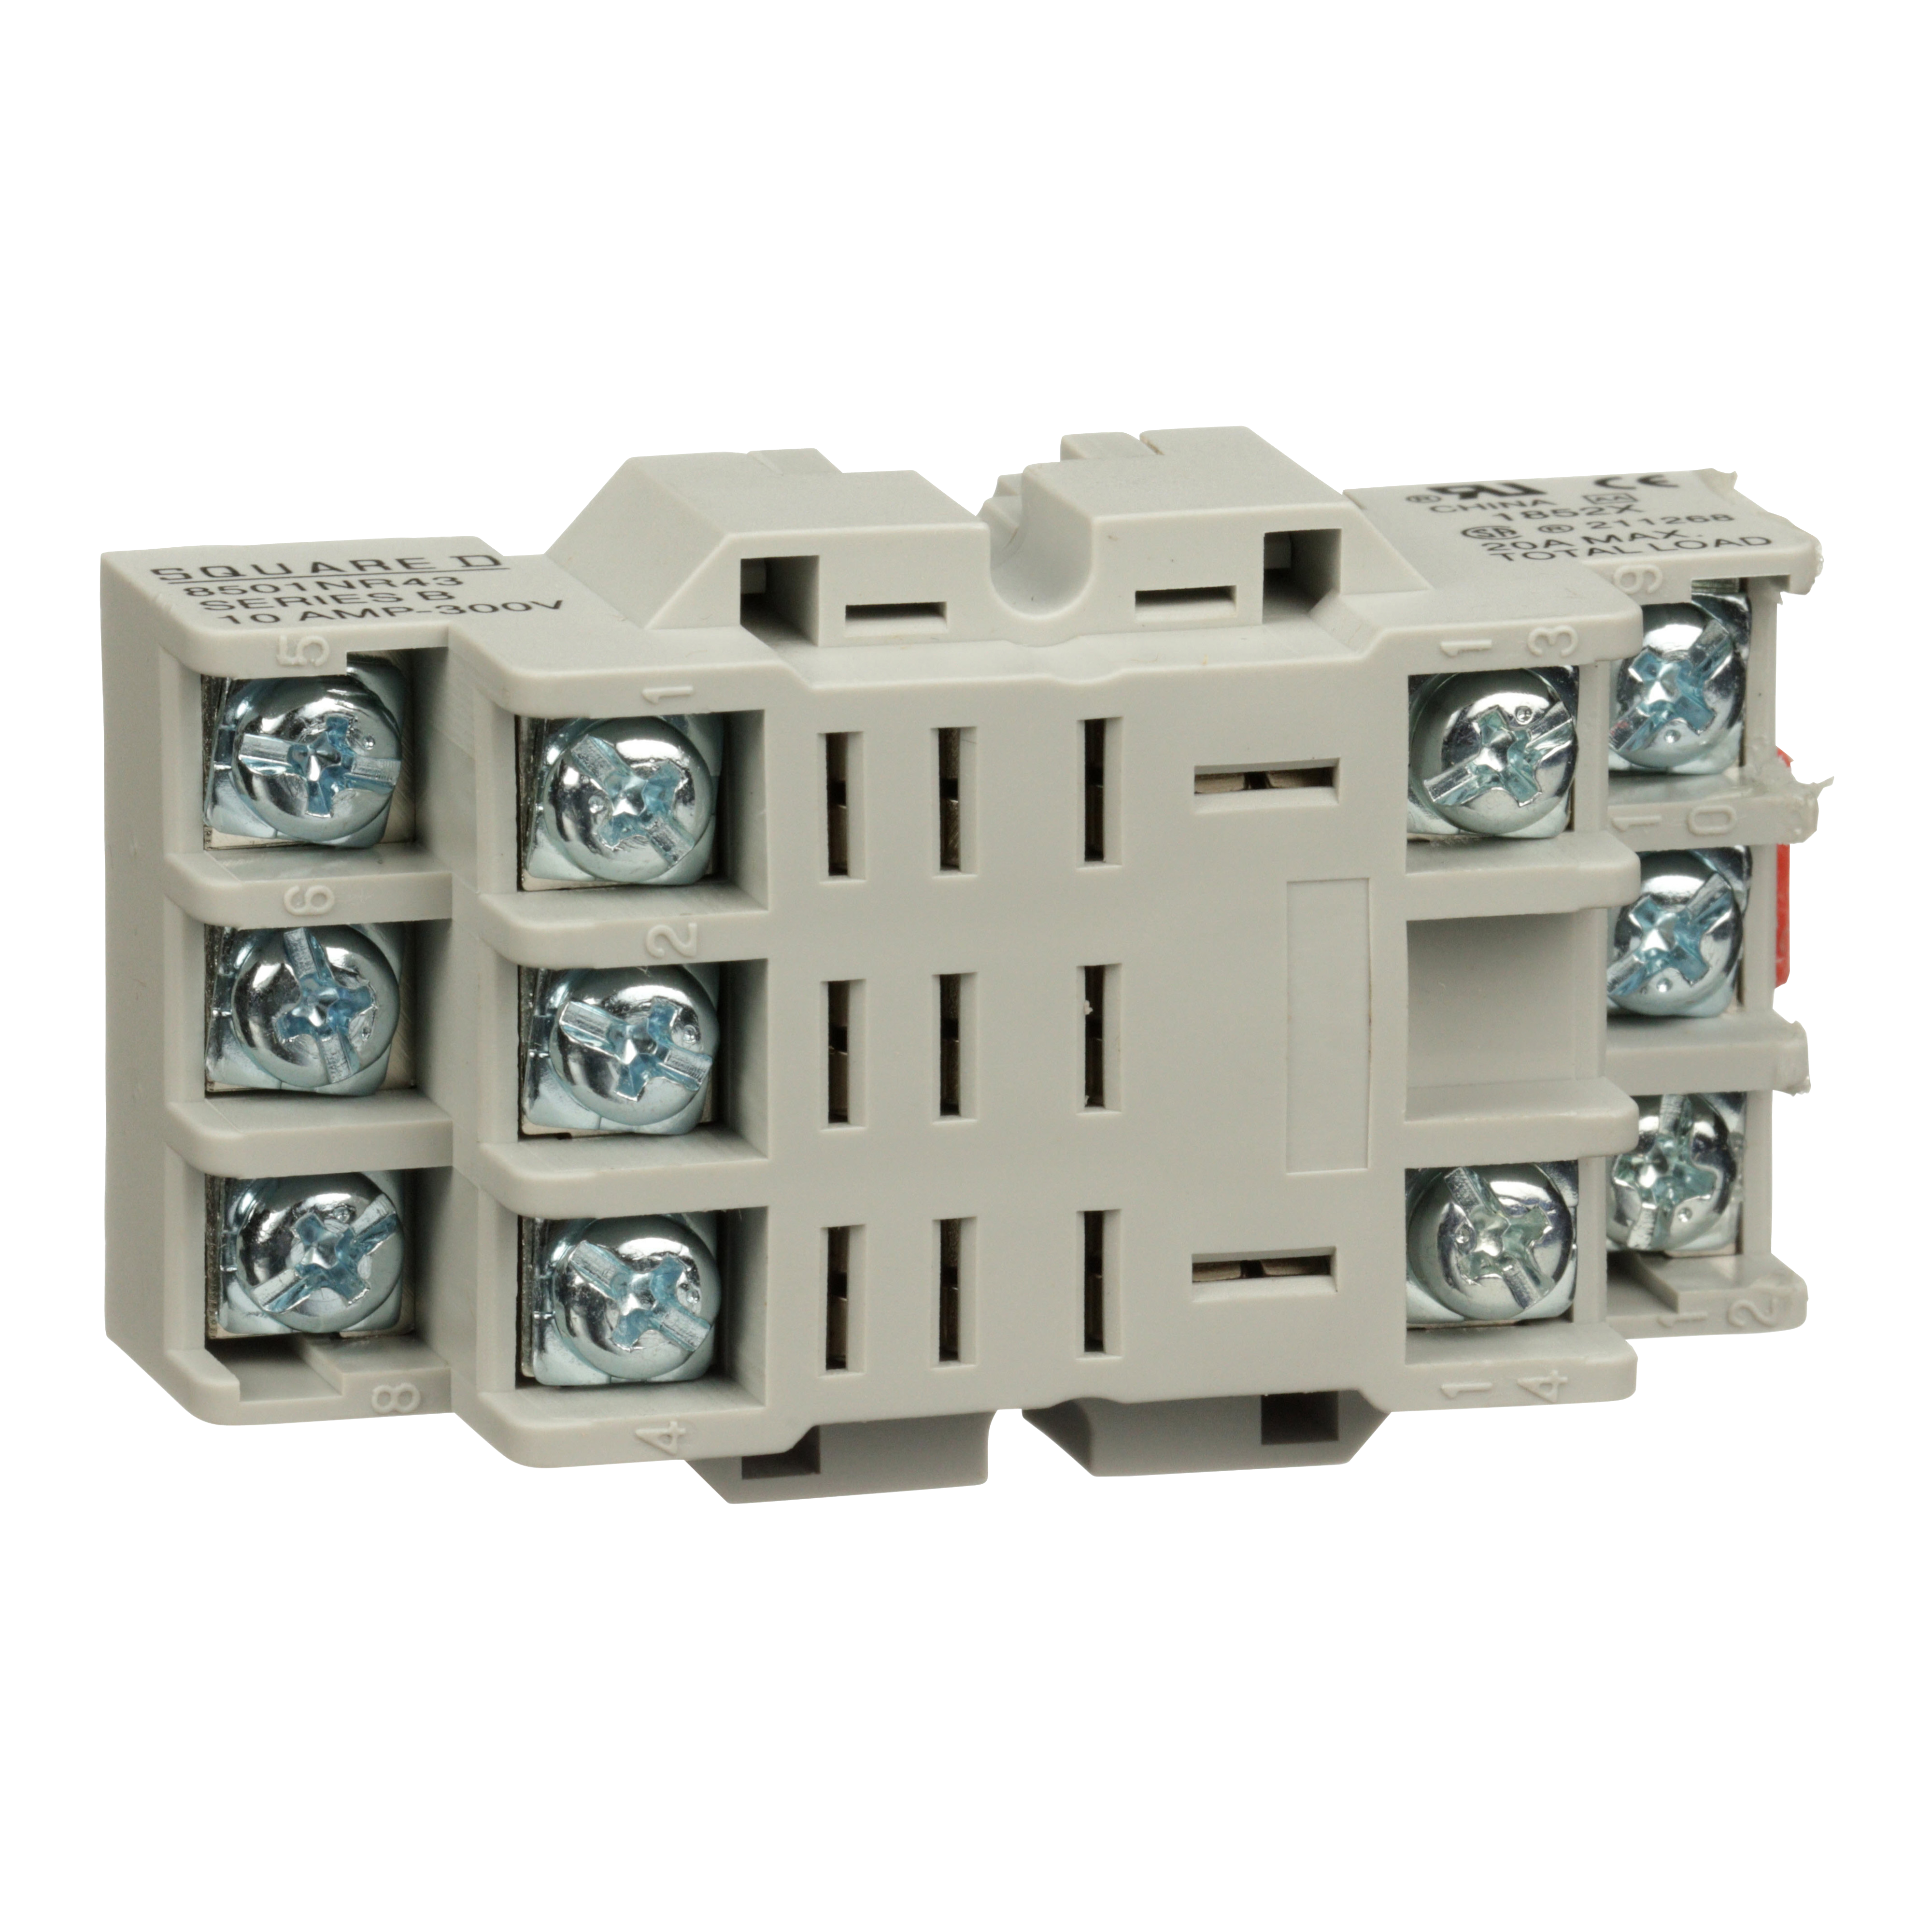 Plug in relay, Type N, relay socket, 11 blade, for 8510R relays